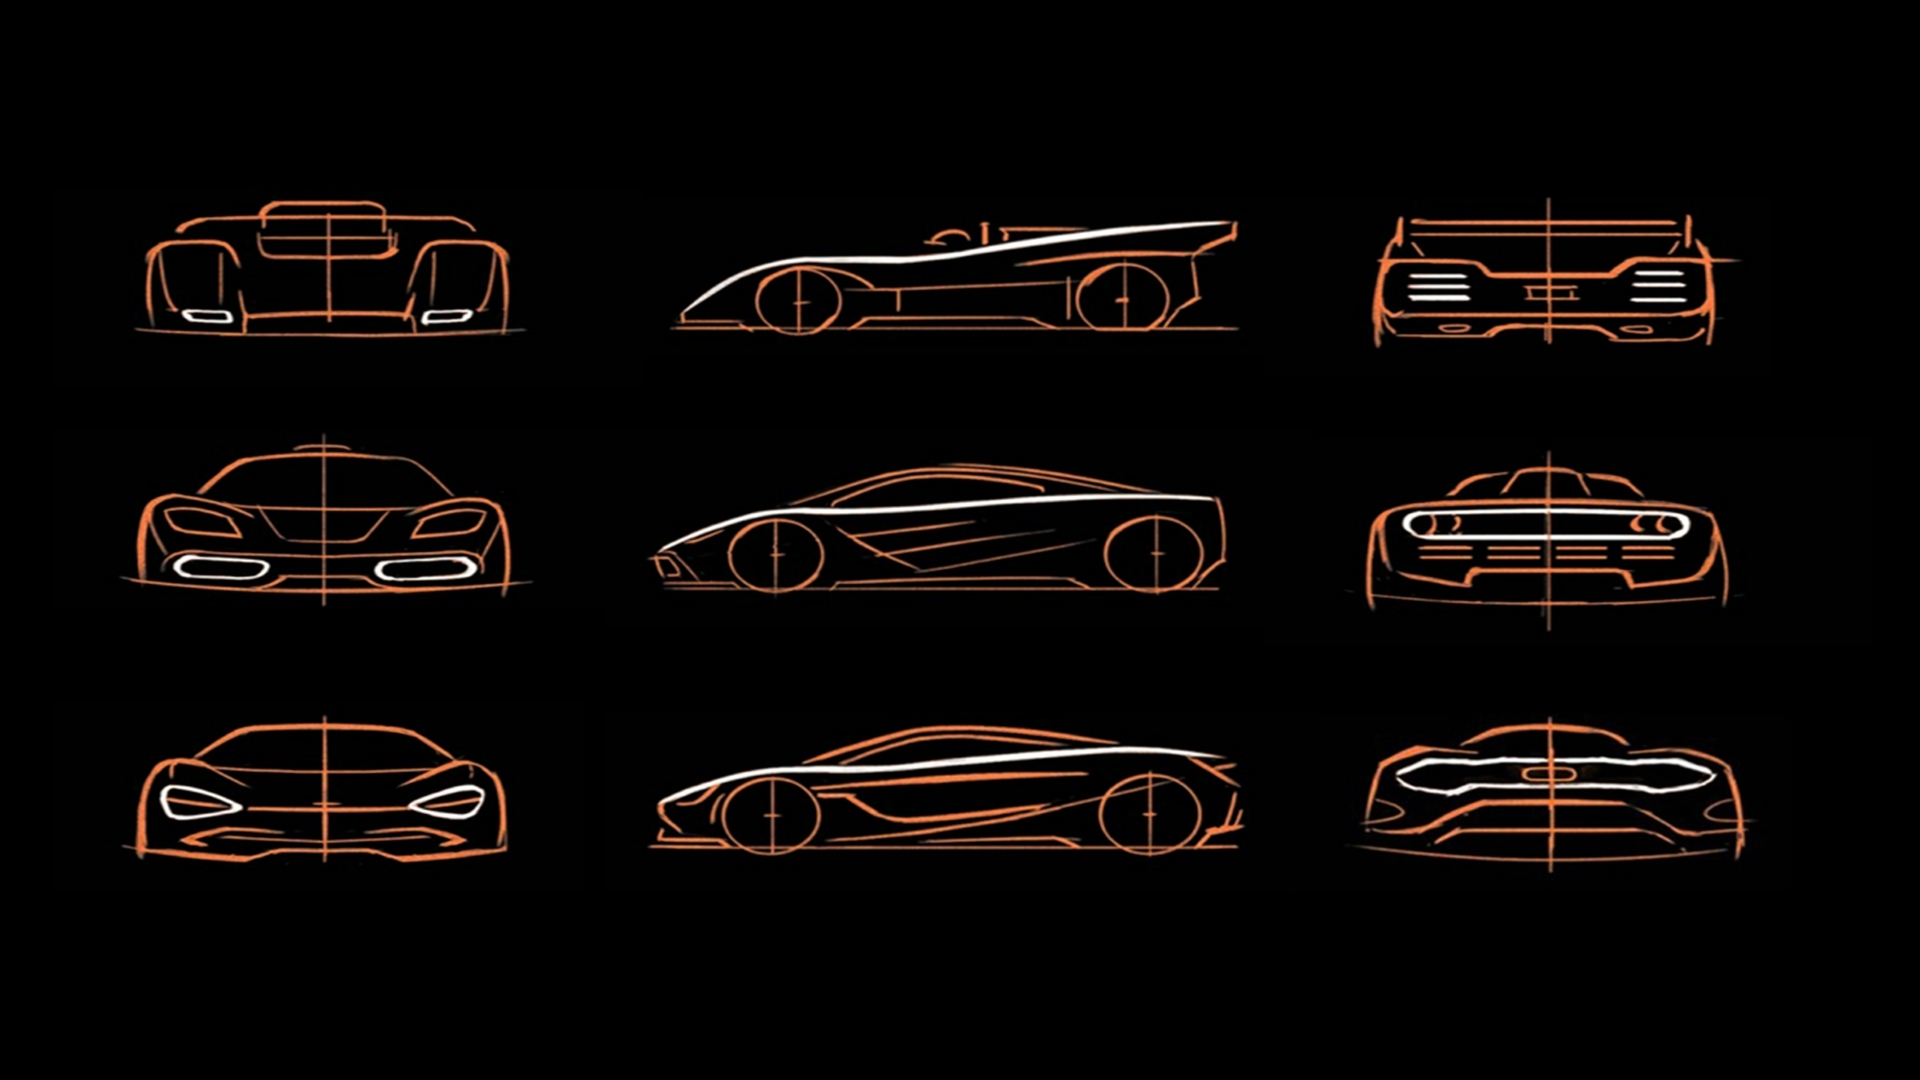 McLaren Teases Next-Gen Design Language For Future Supercars And Hypercars